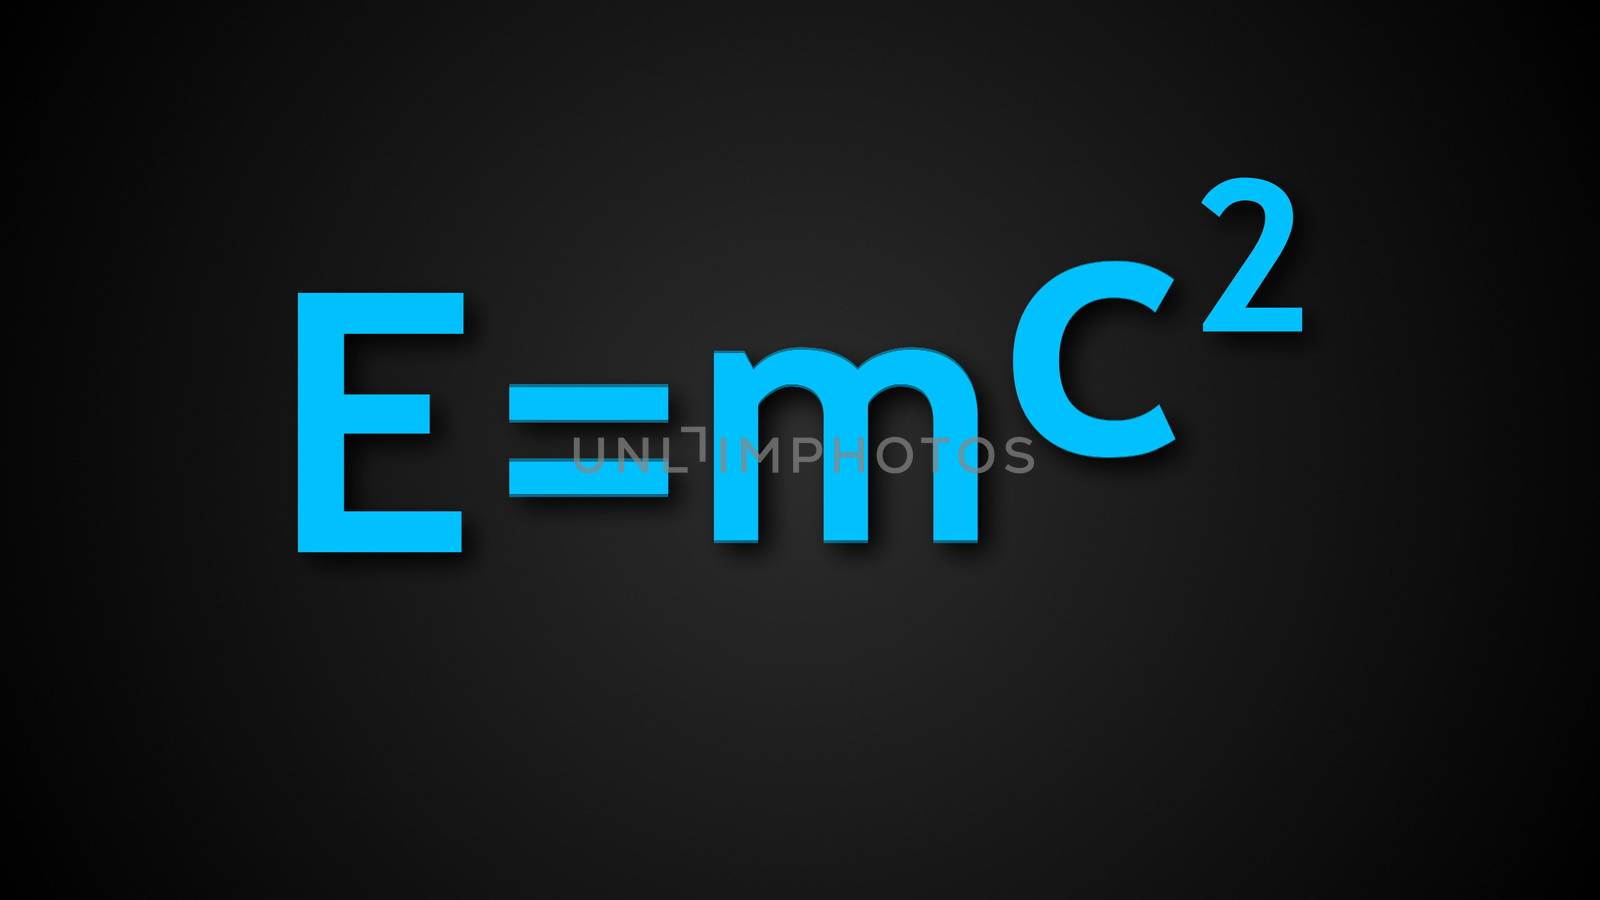 E mc2 Albert Einsteins physical formula are on black background, mass-energy equivalence by nolimit046